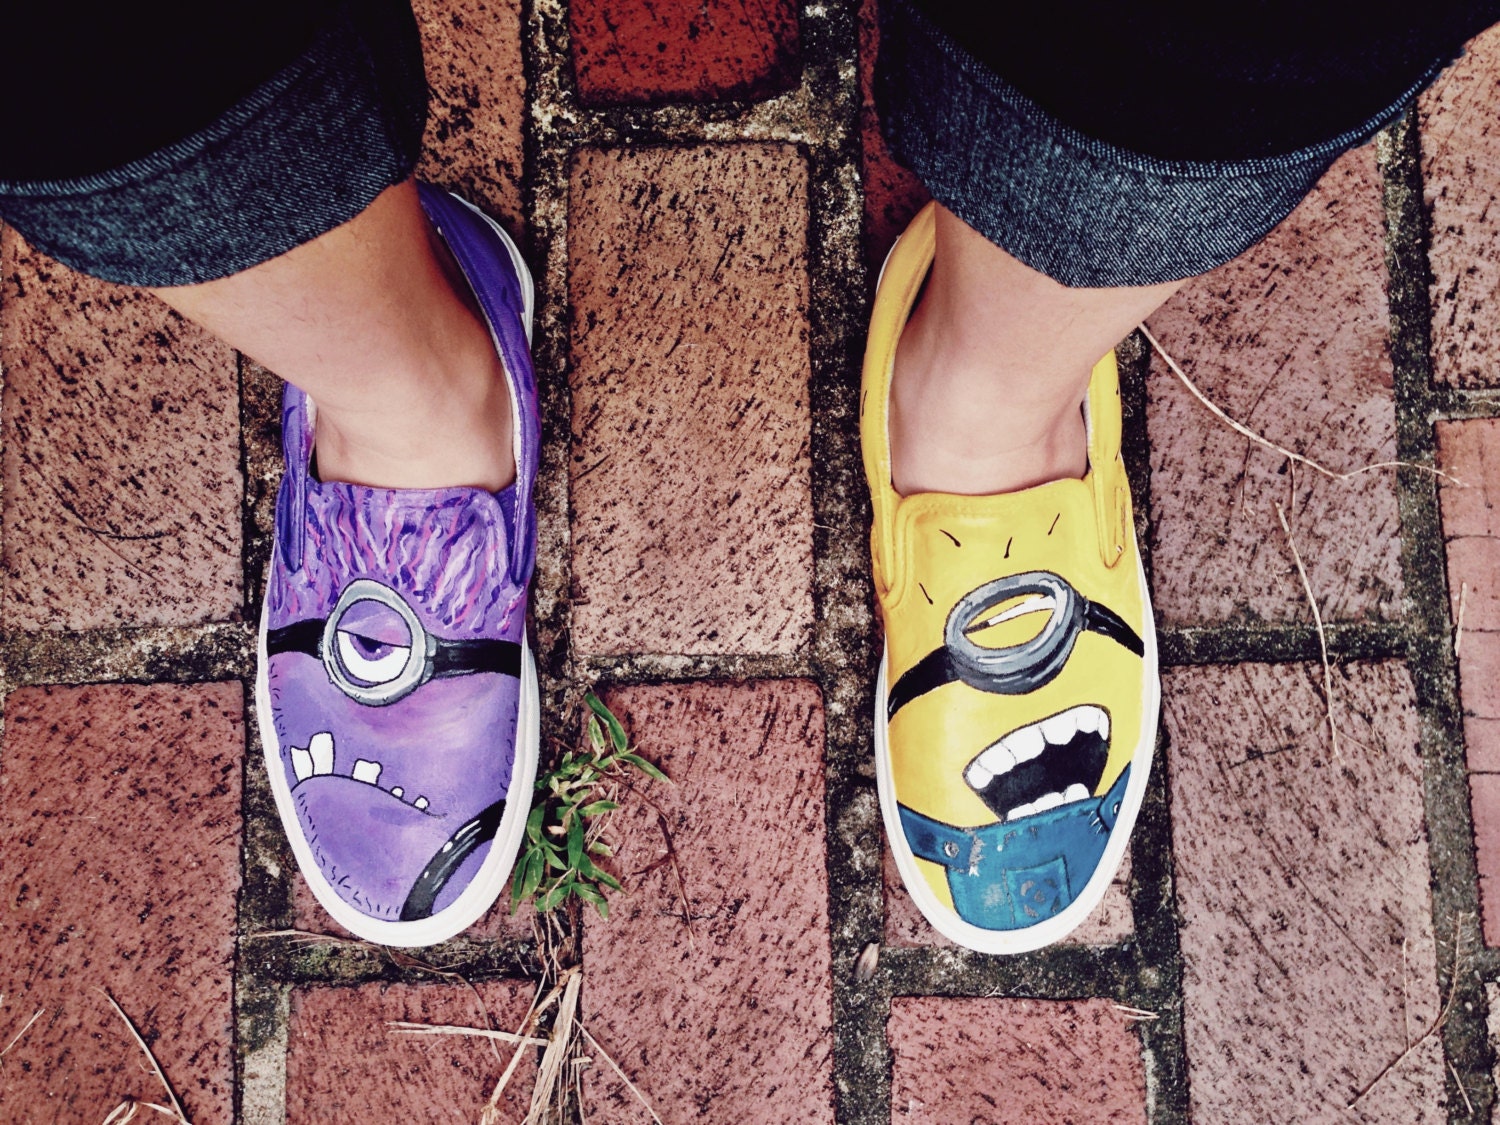 Custom Hand-Painted Despicable Me Minion Vans Shoes (Shoes NOT included)